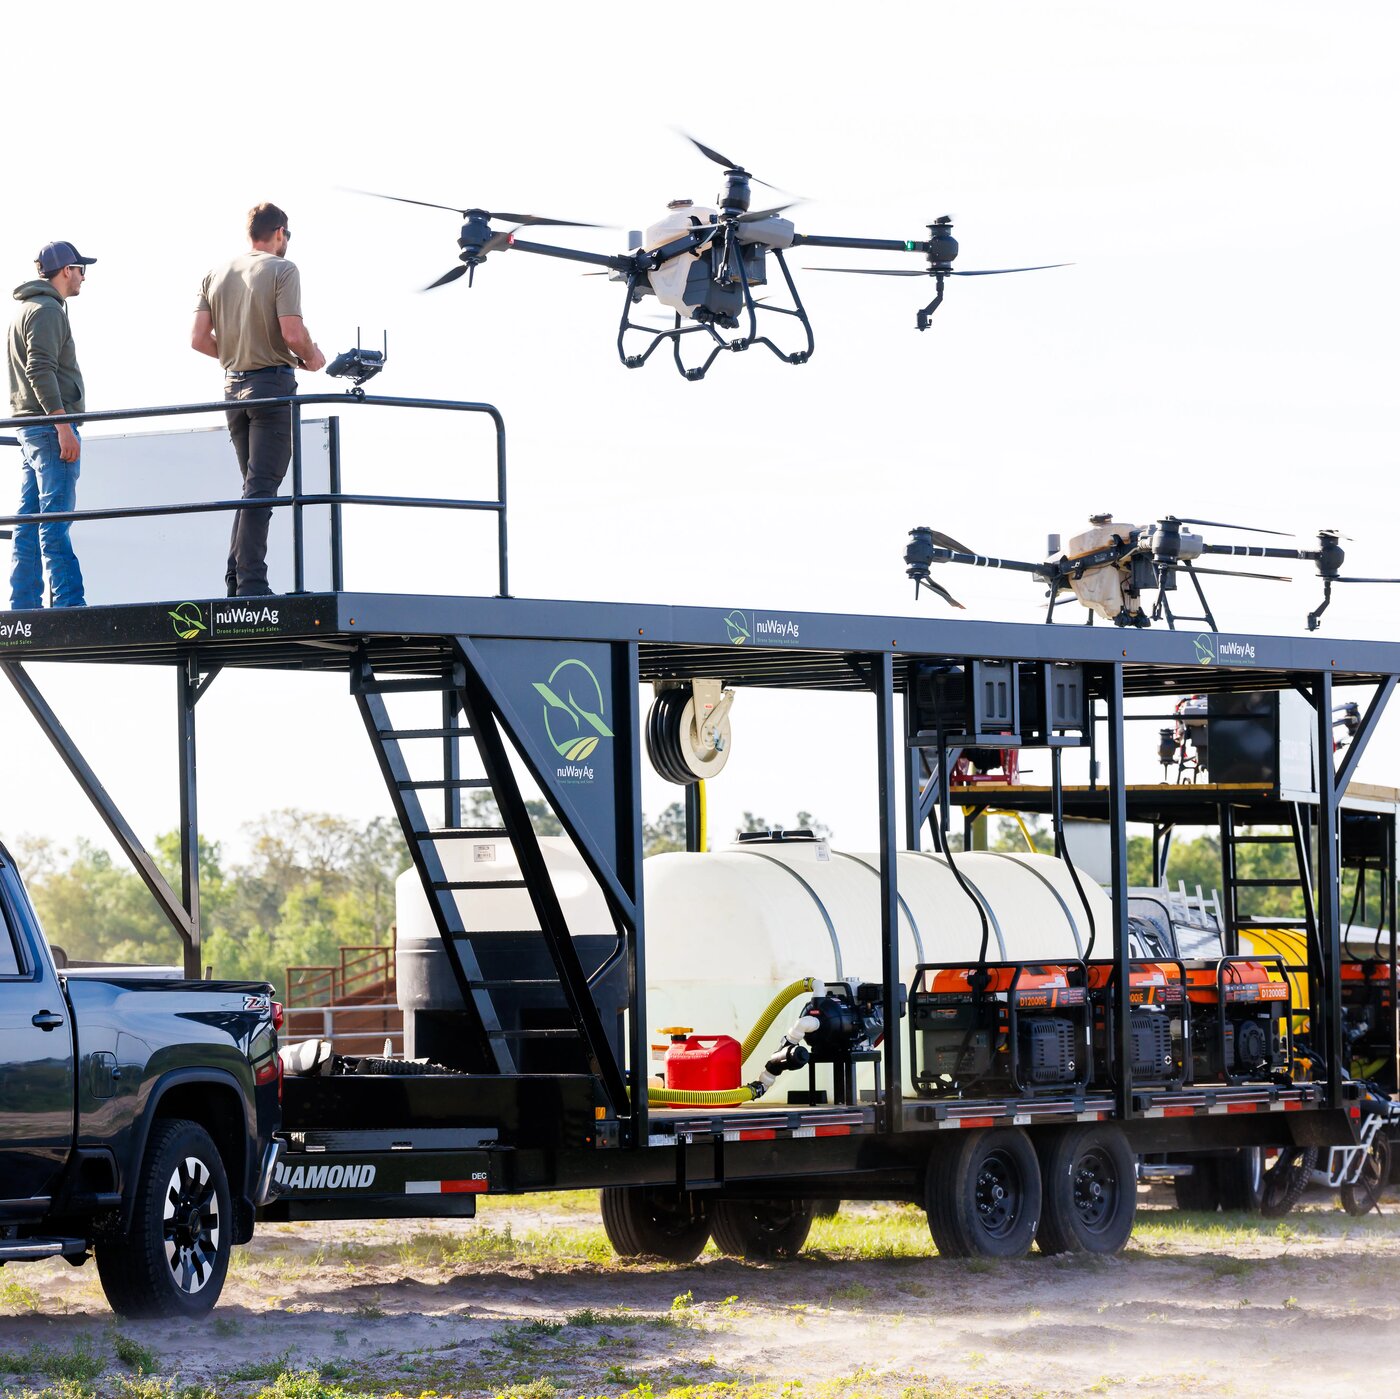 Drone Trailer: Design Your Own